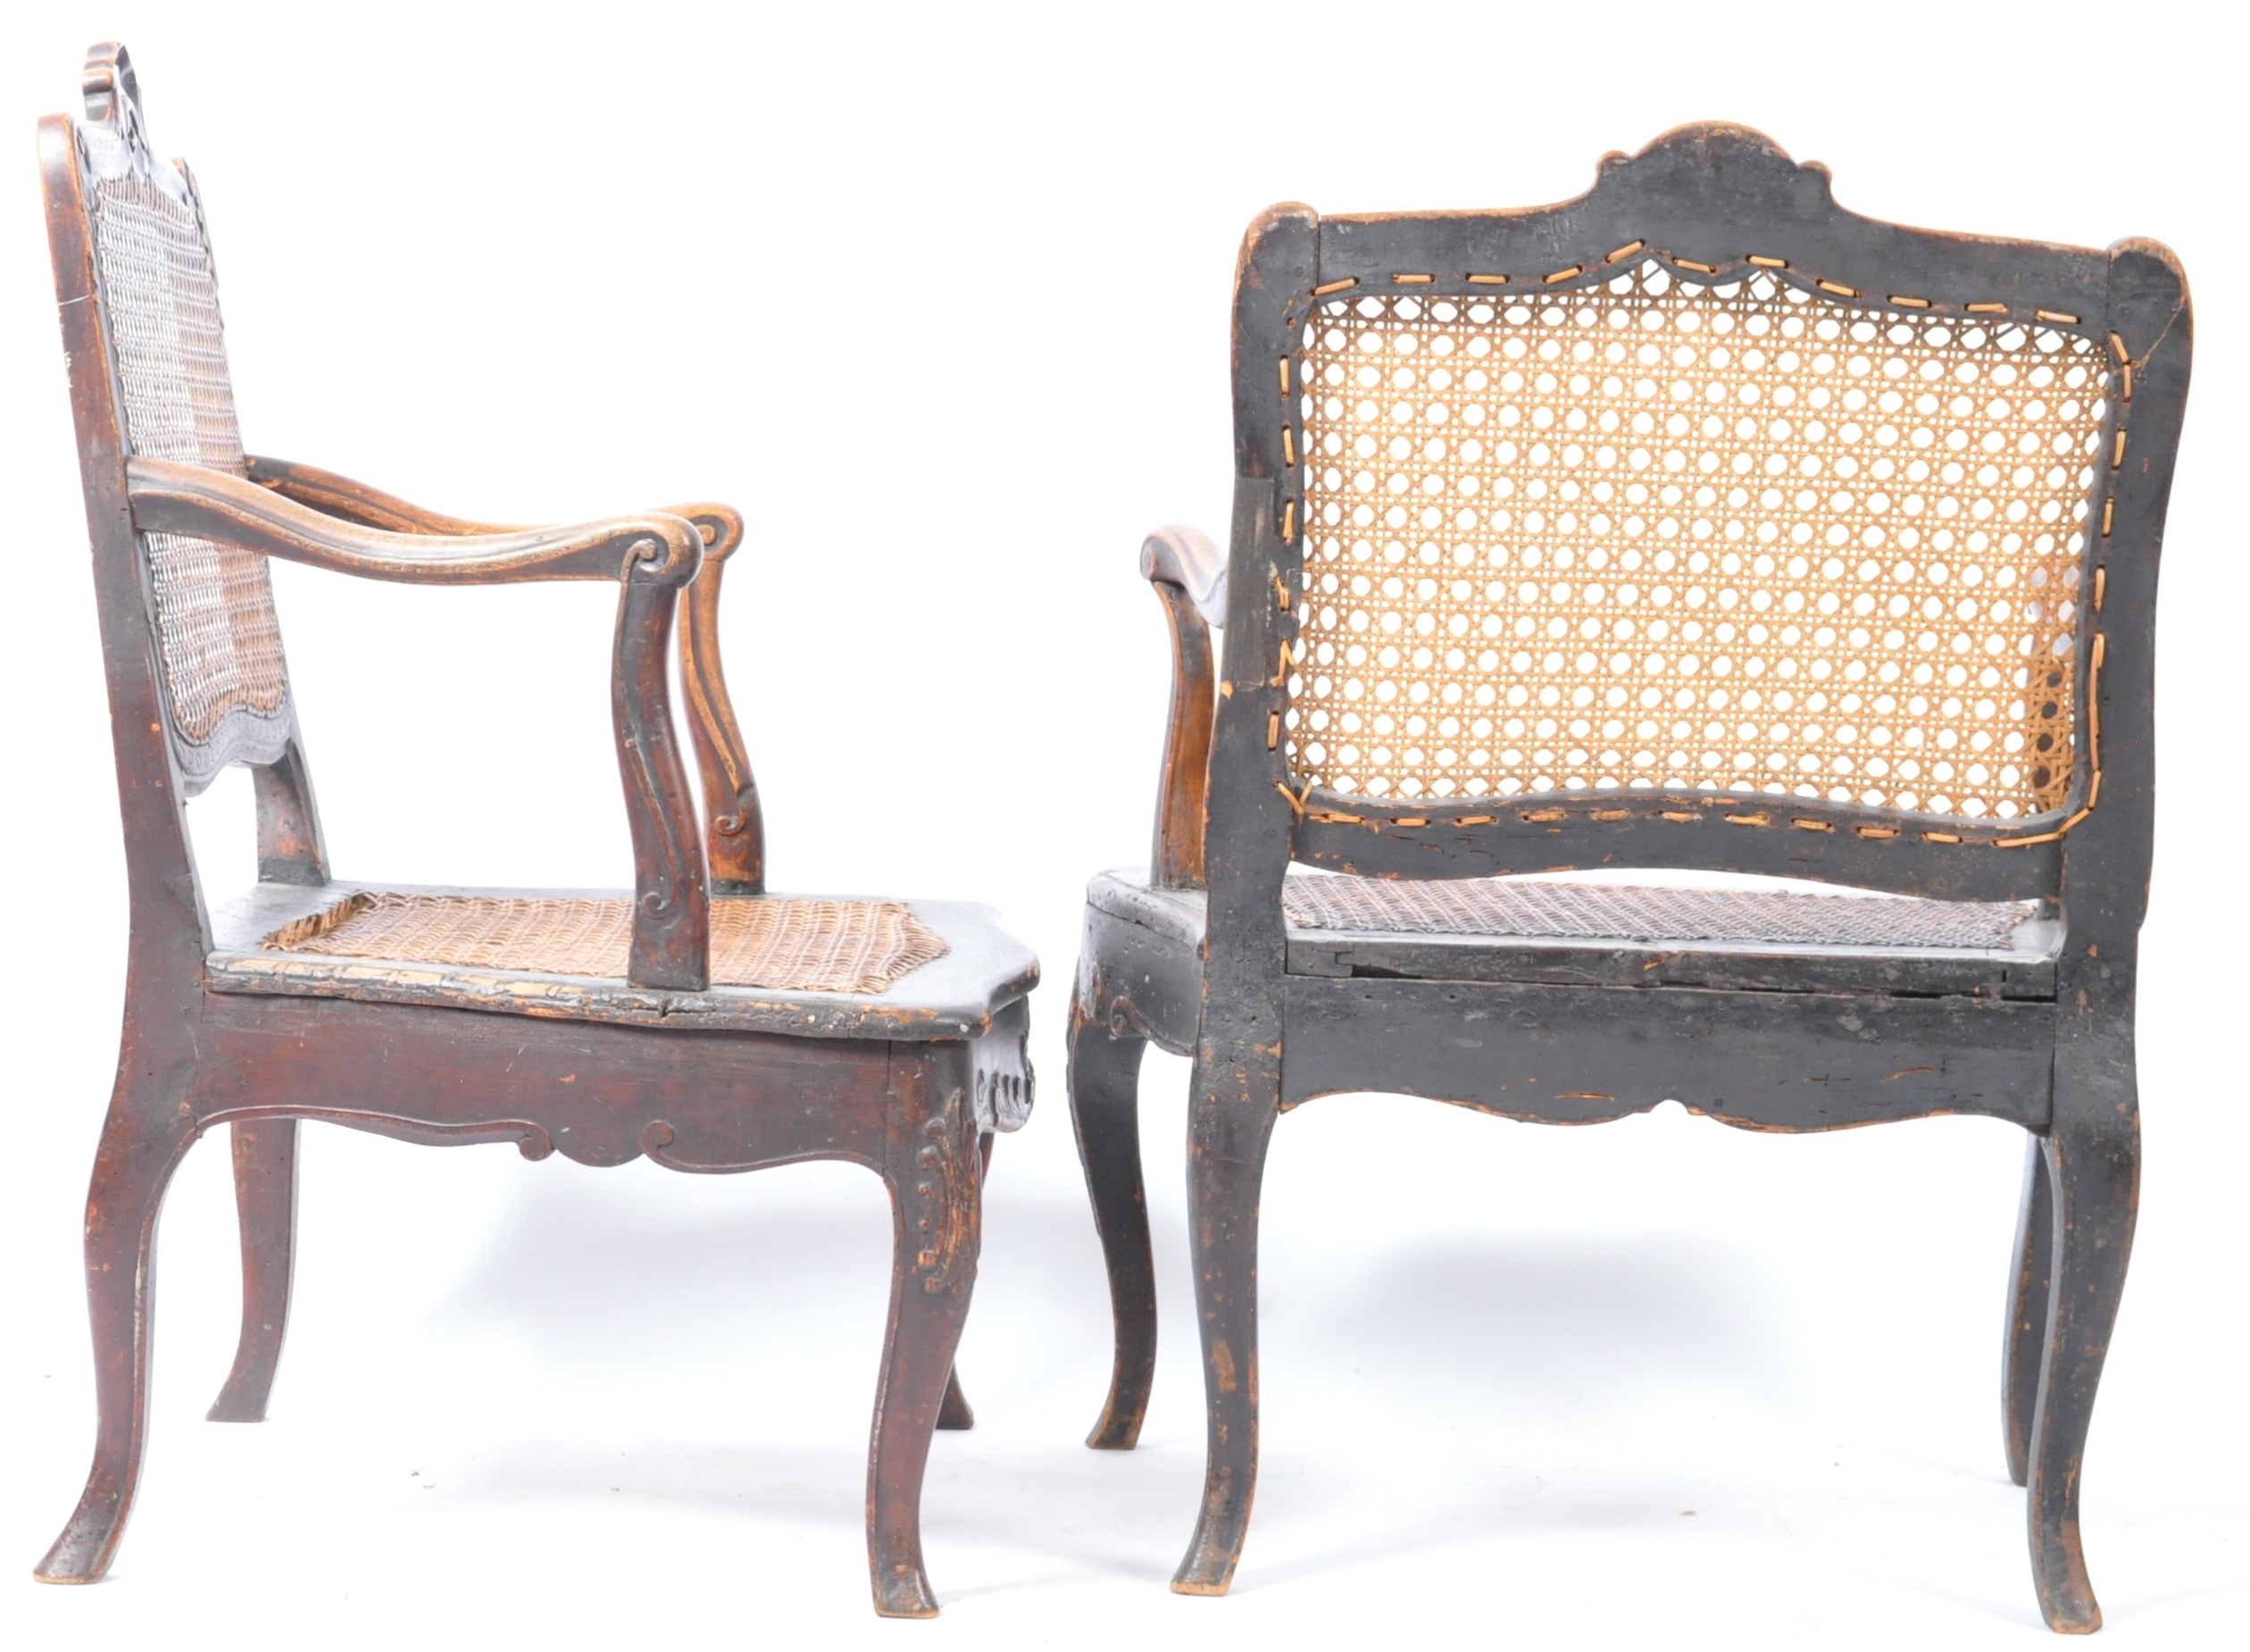 ANTIQUE PAIR OF 18TH CENTURY GEORGIAN CANE & WALNUT ELBOW CHAIRS - Image 7 of 9